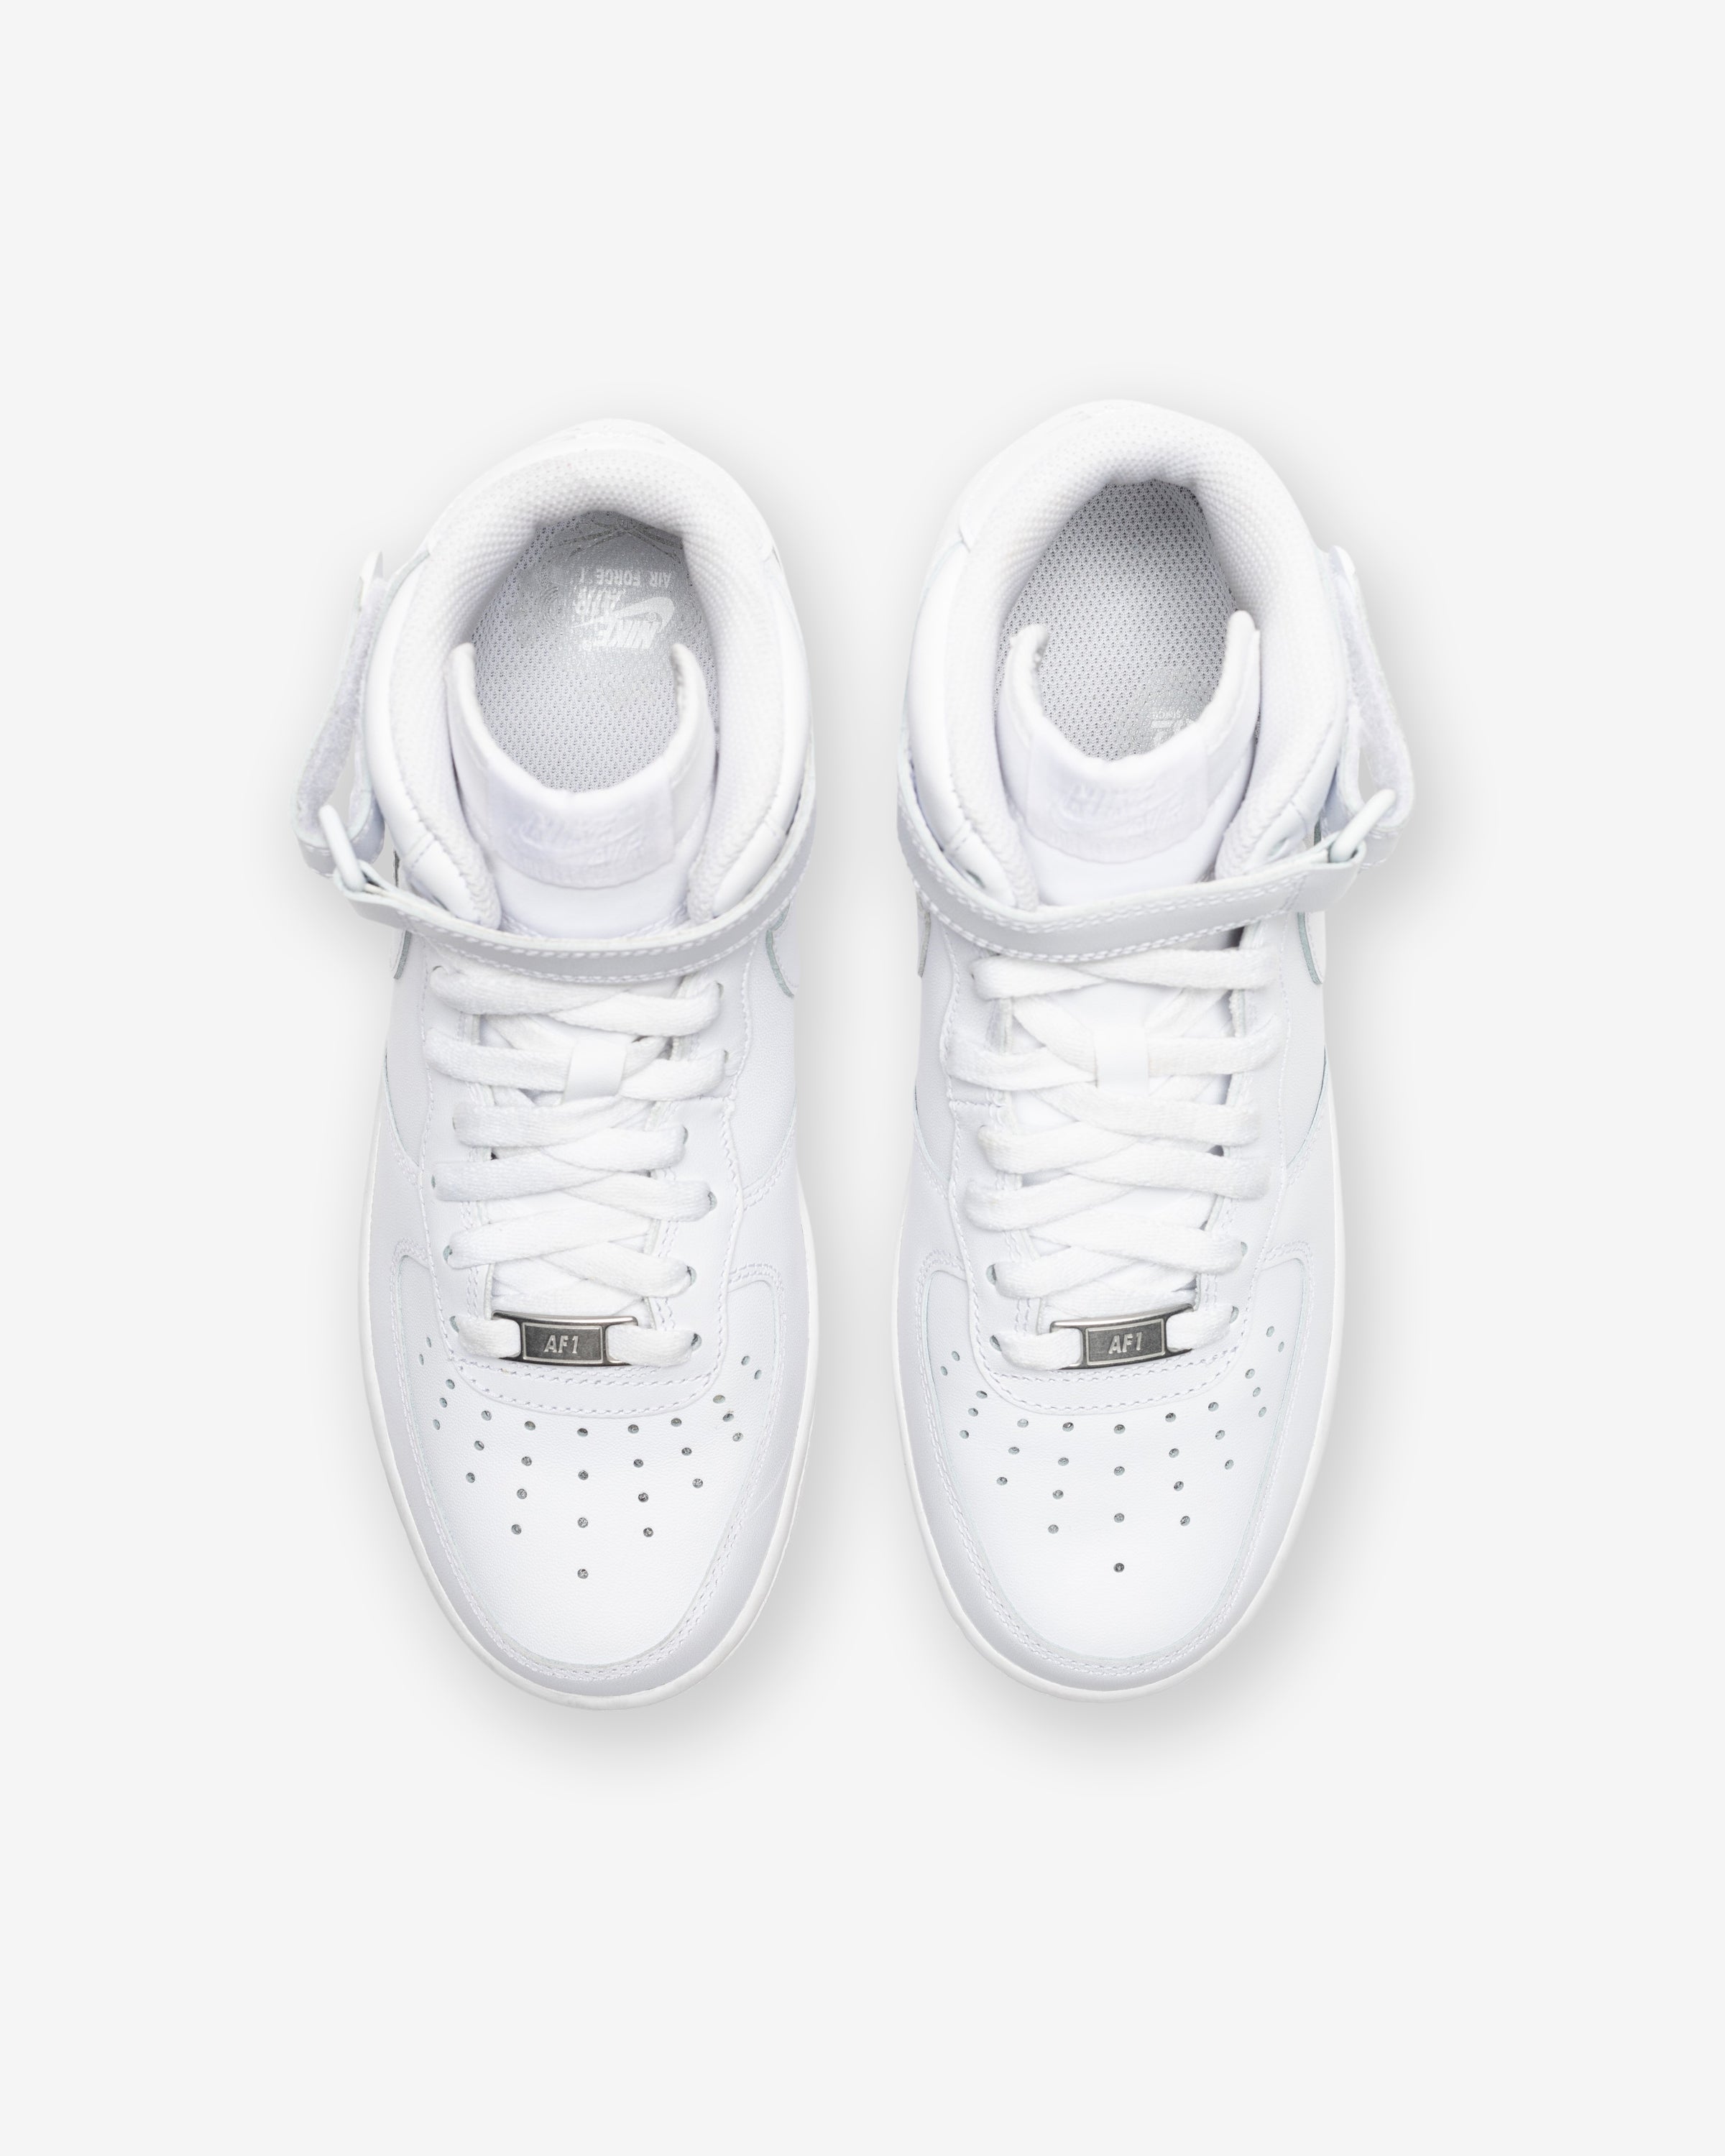 NIKE WOMEN'S AIR FORCE 1 '07 MID - WHITE